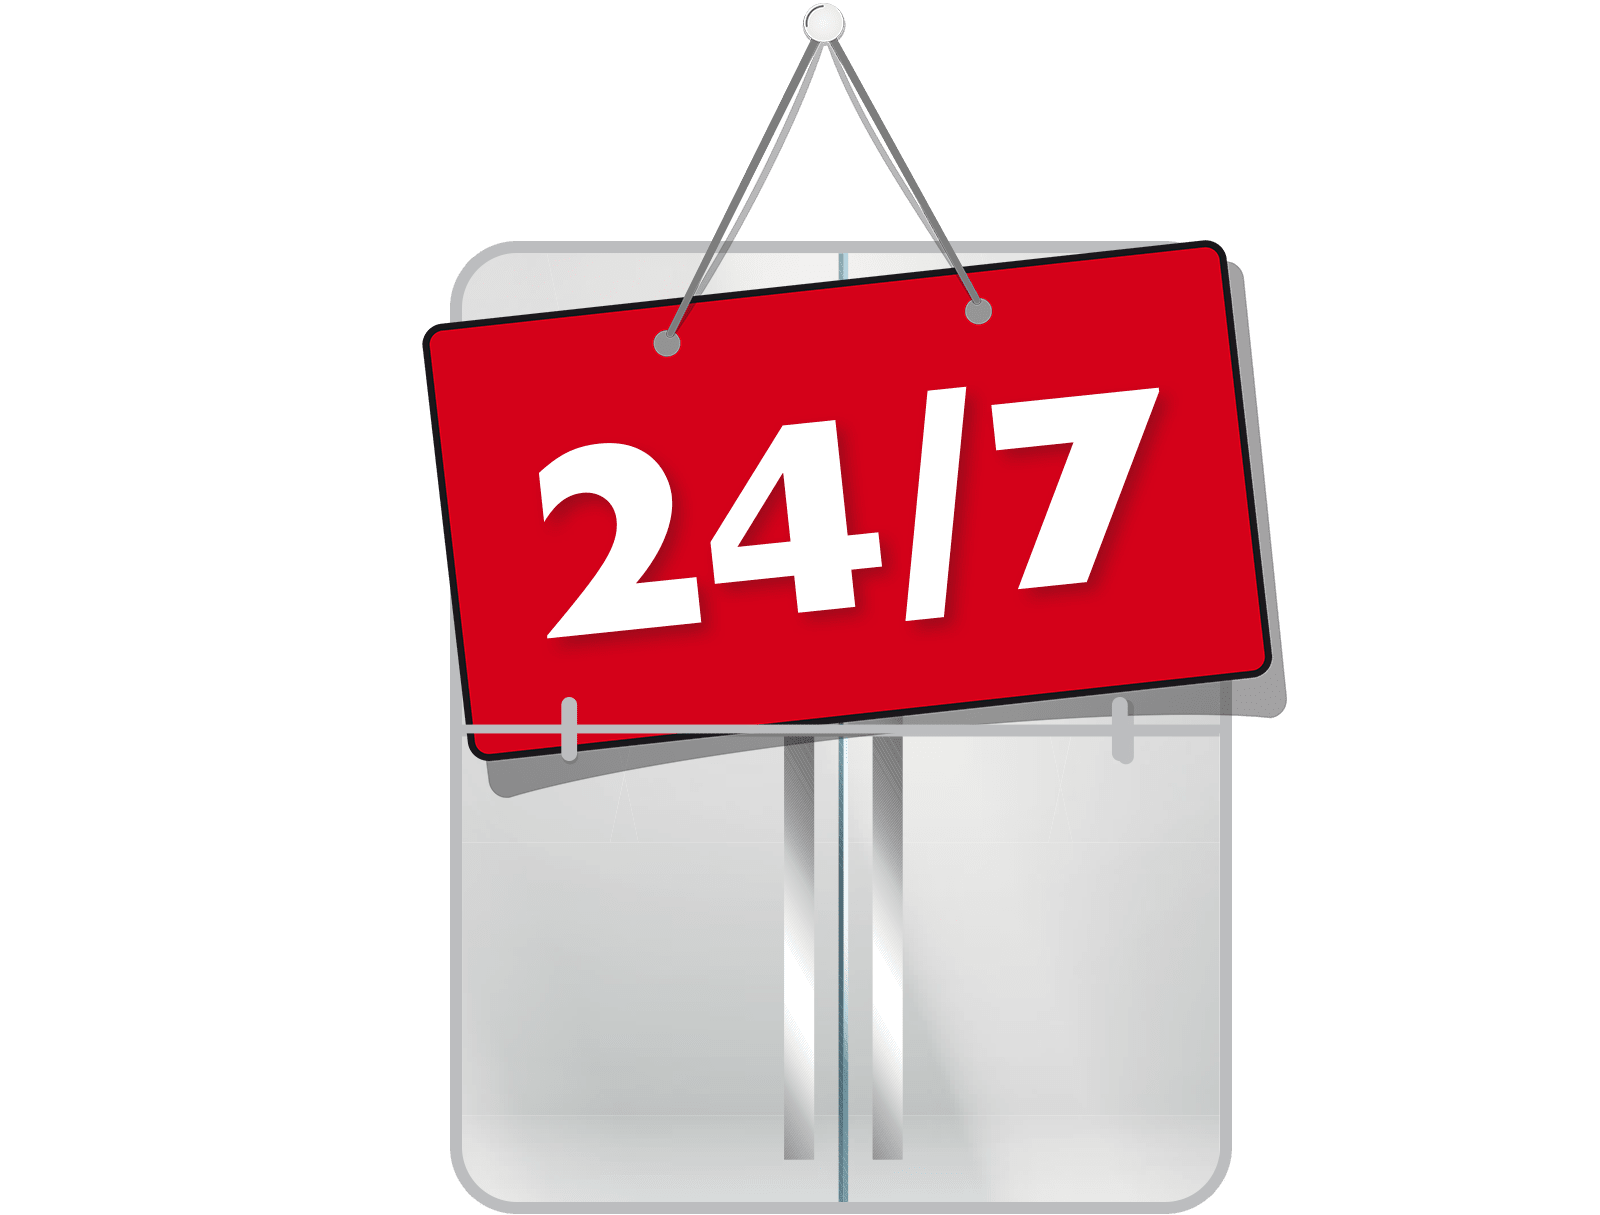 Icon of a sign reading "24/7"